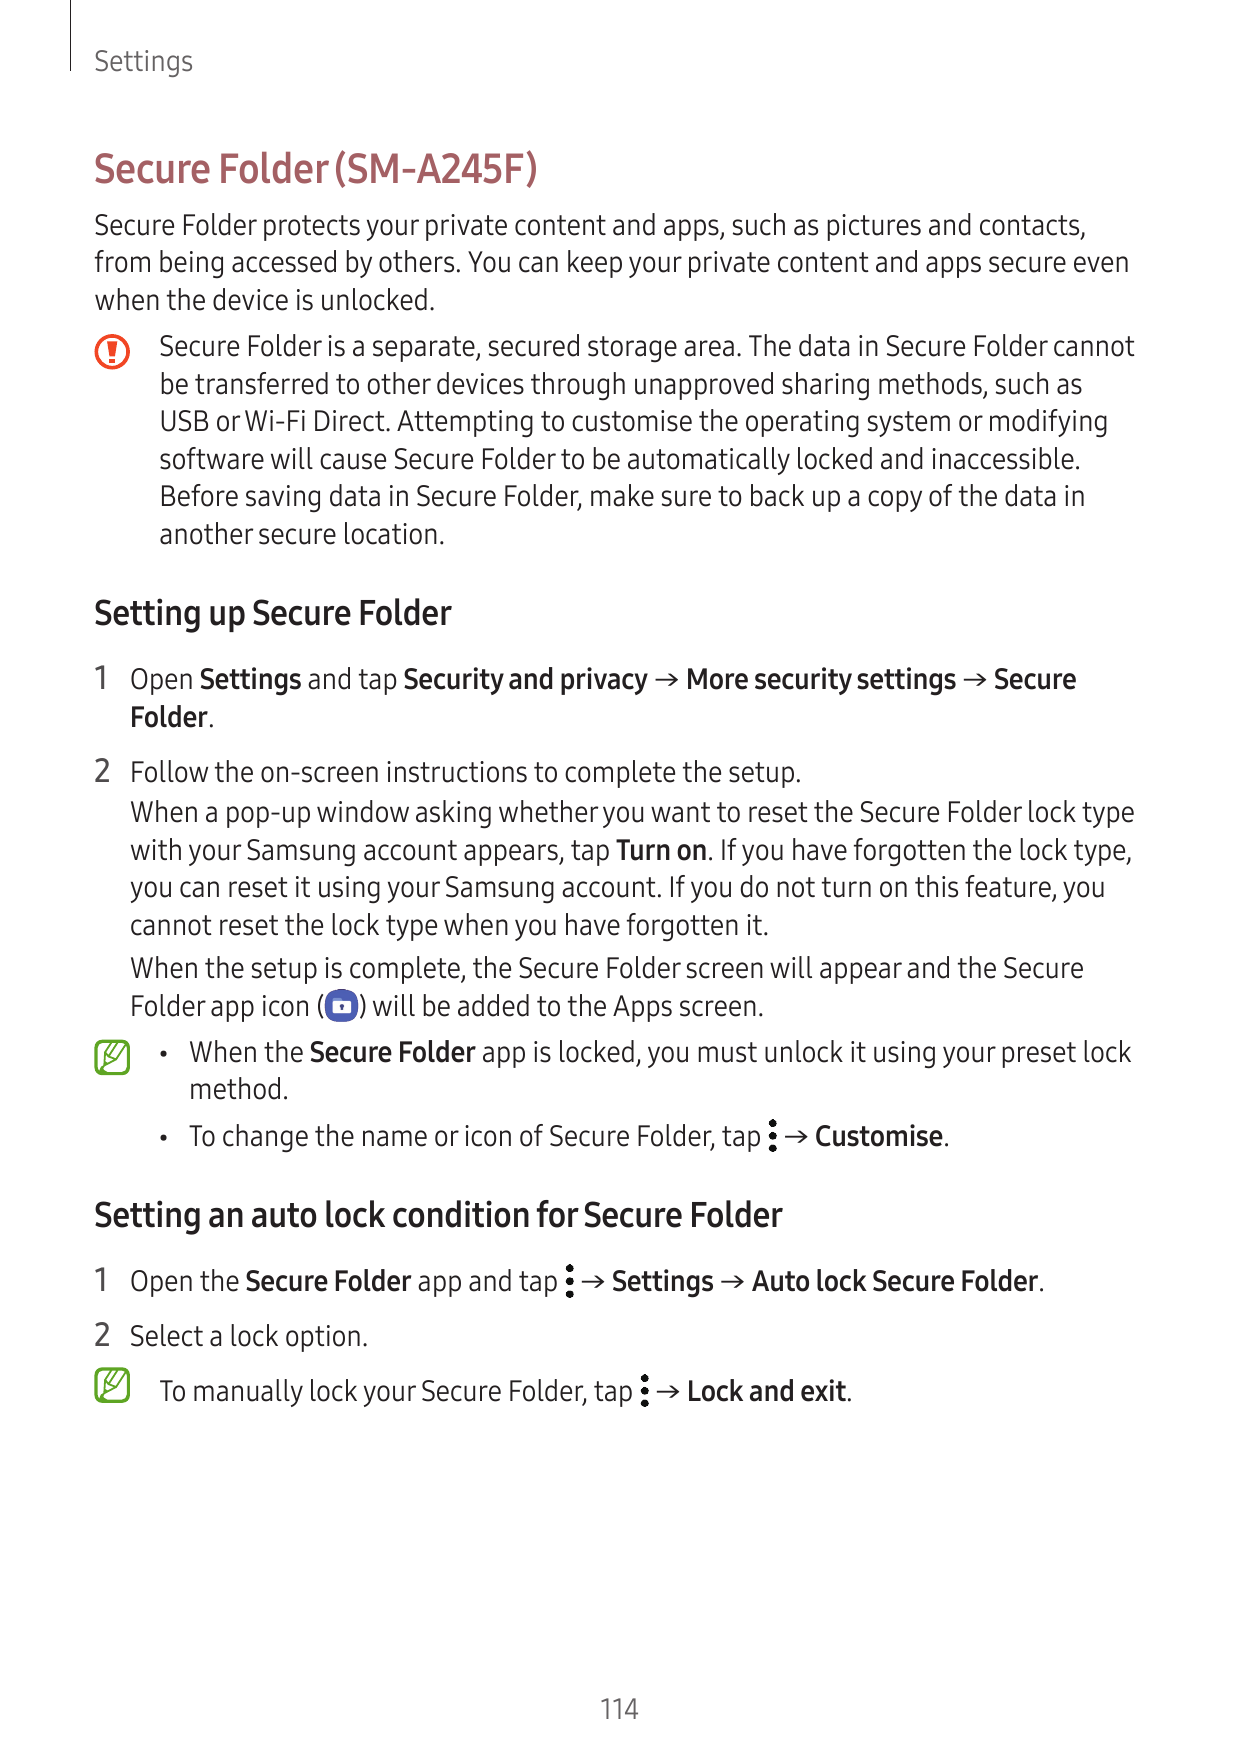 SettingsSecure Folder (SM-A245F)Secure Folder protects your private content and apps, such as pictures and contacts,from being a